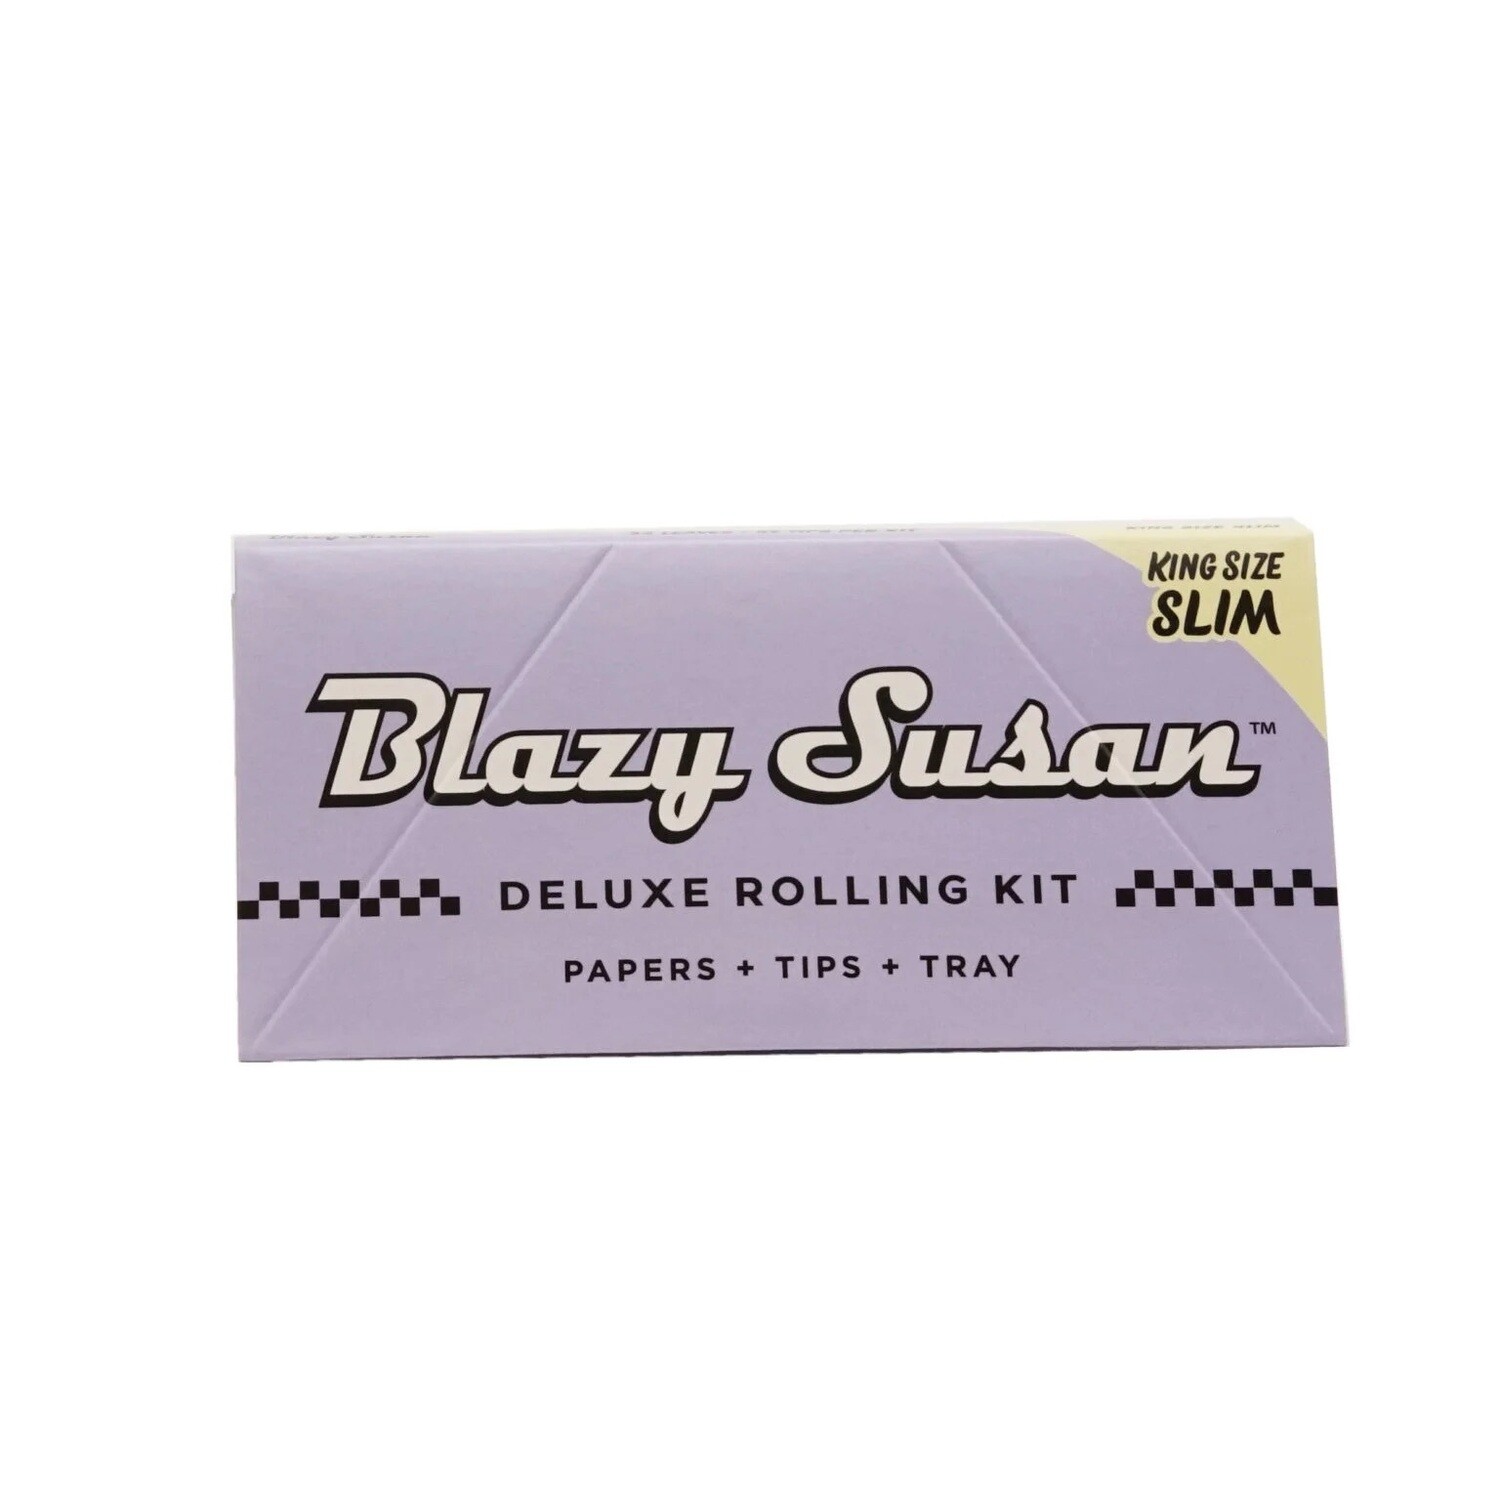 Blazy Susan Purple Deluxe Rolling Kit Papers + Tips + Tray King Size Slim